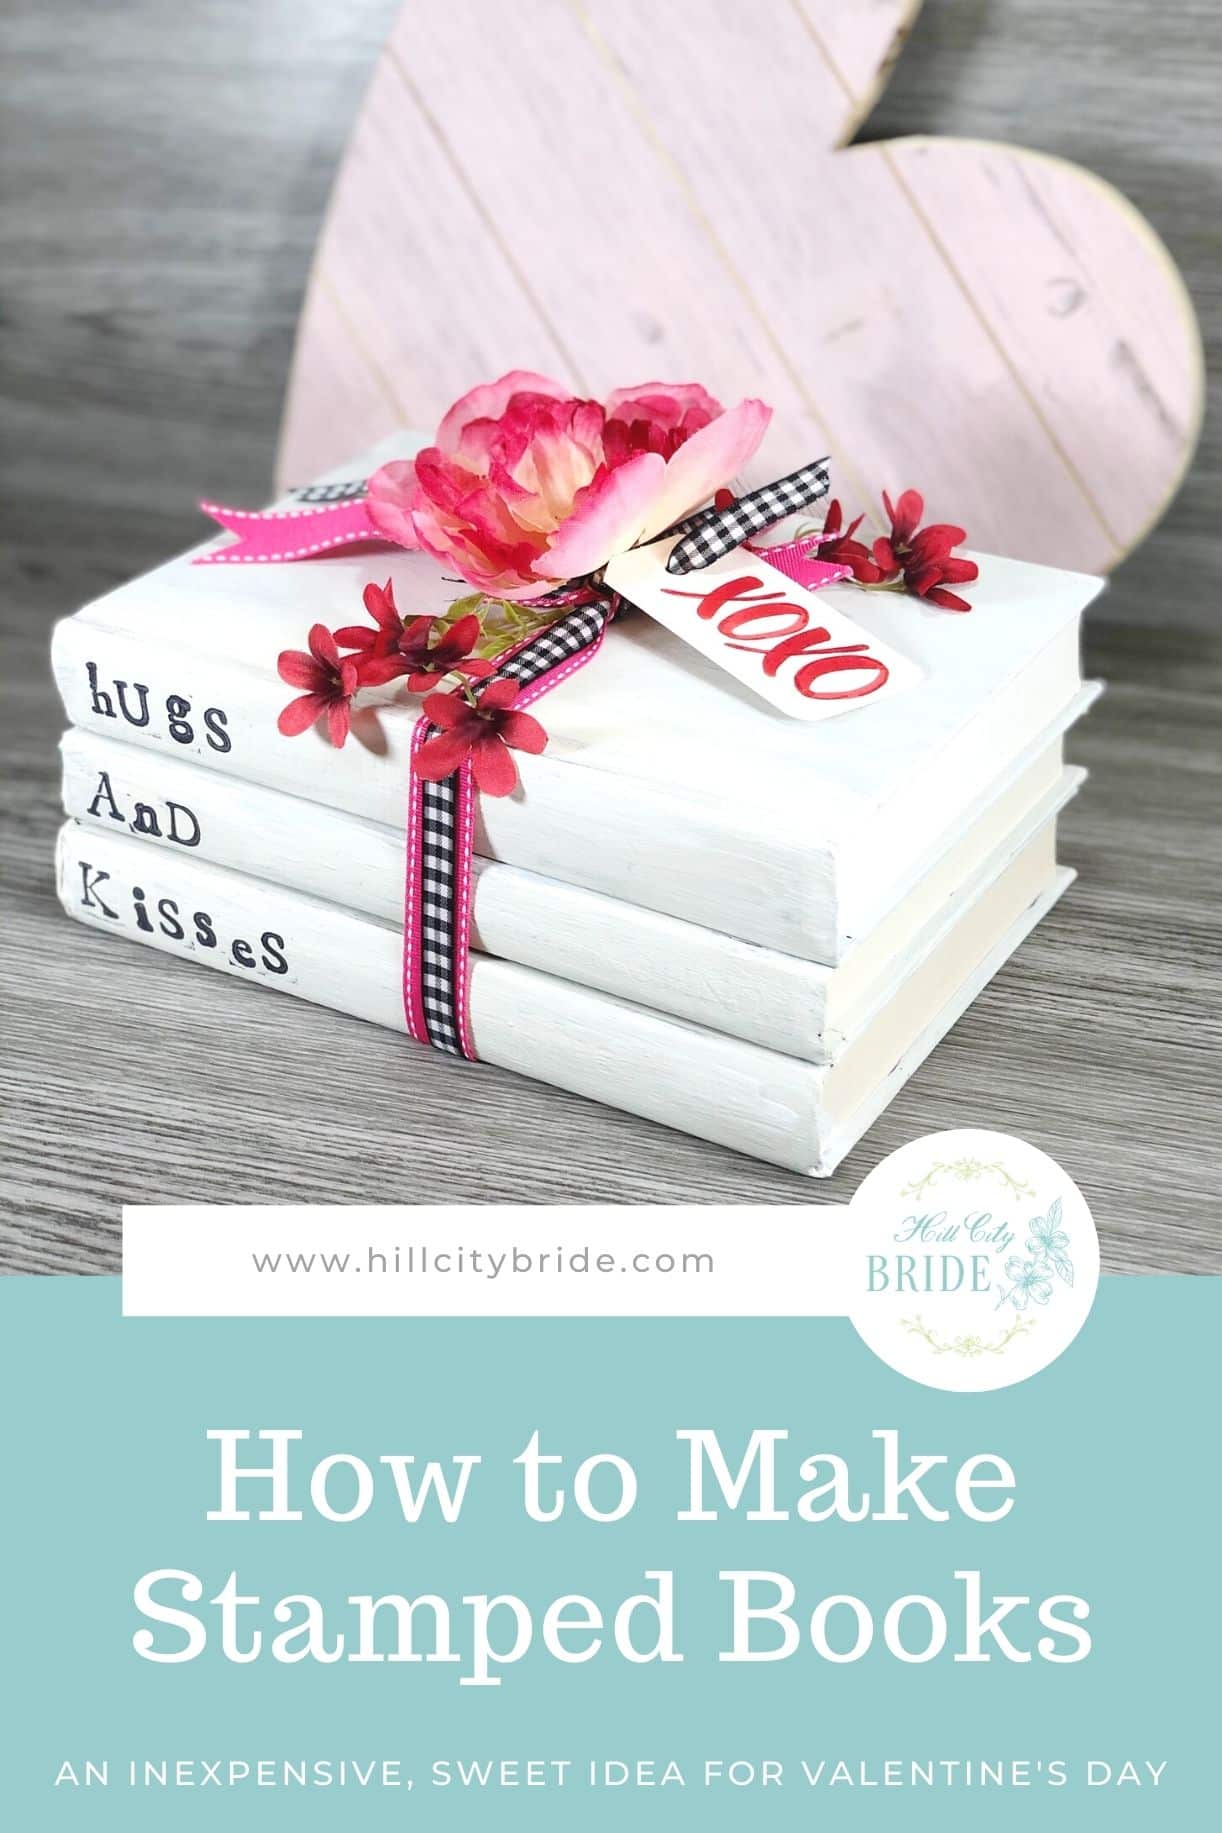 How to Make Stamped Books for Your Love